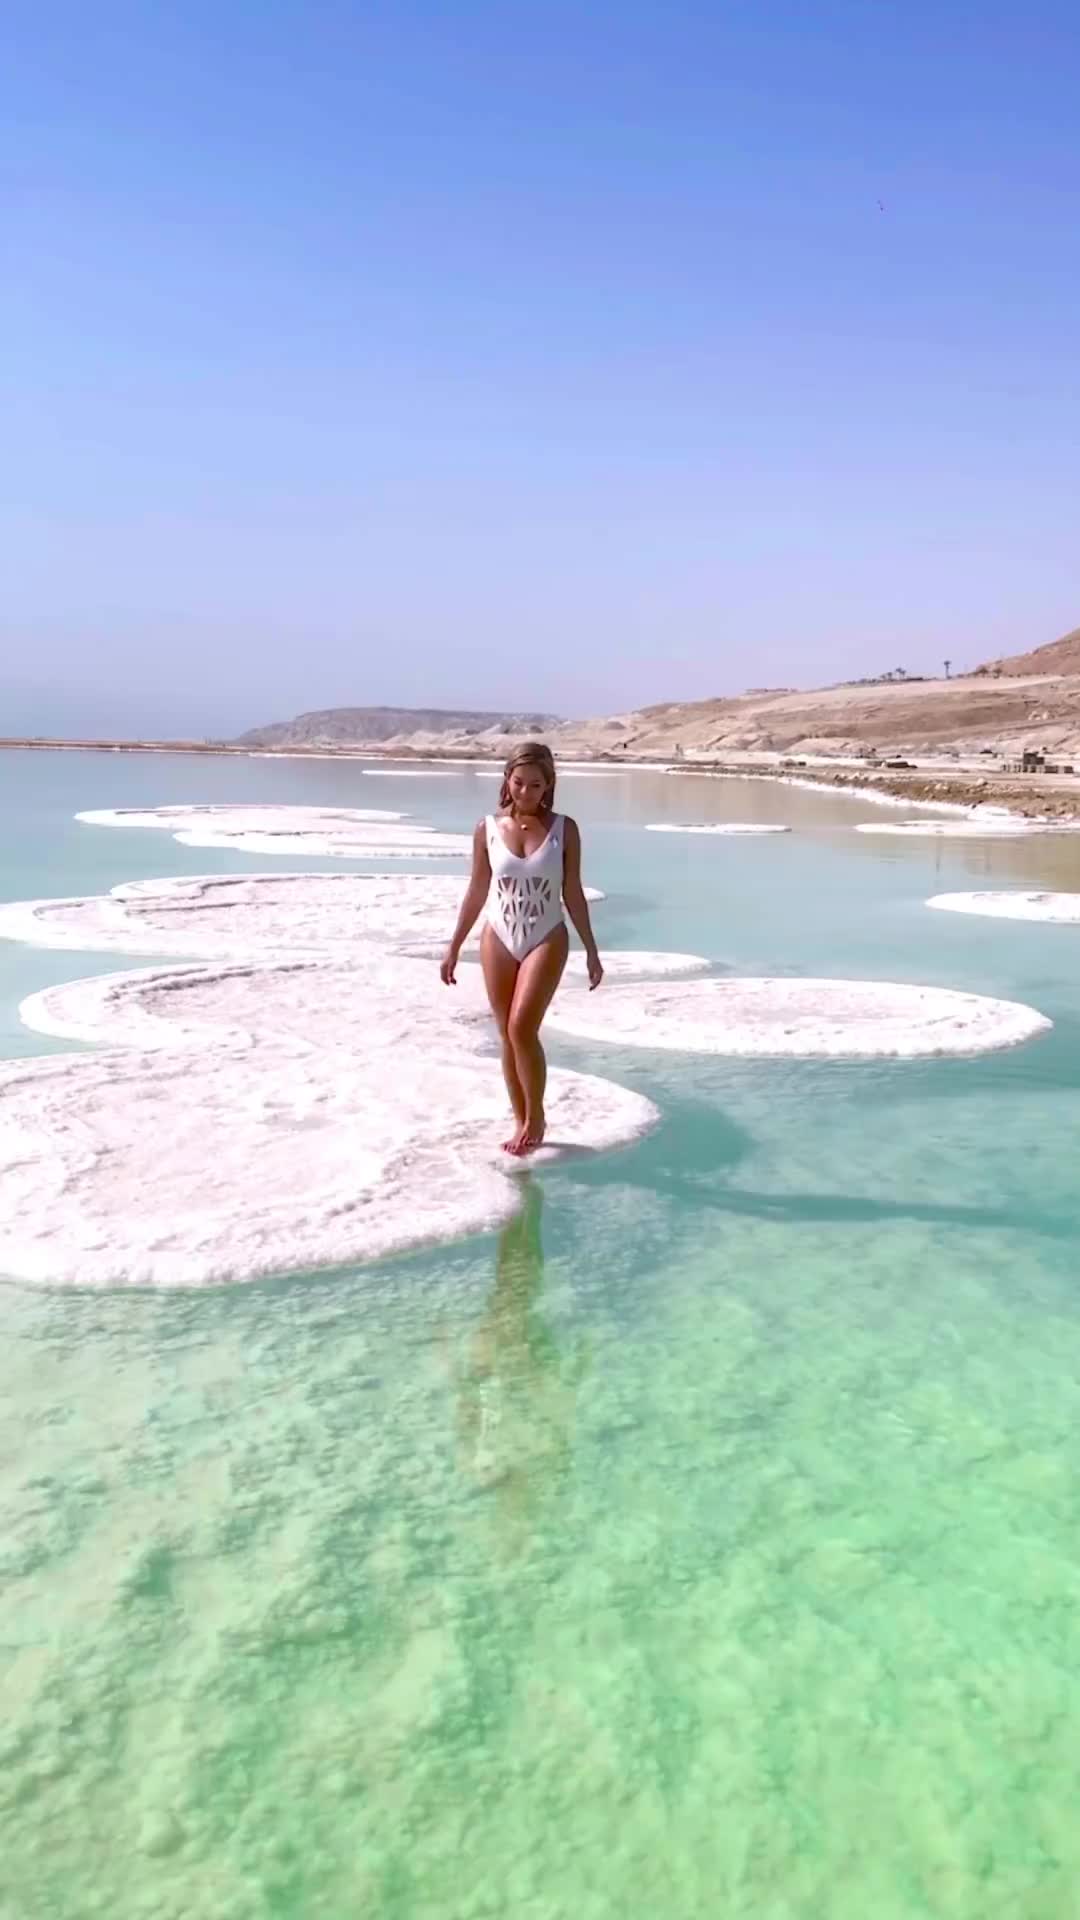 Floating in the Dead Sea: An Unforgettable Experience